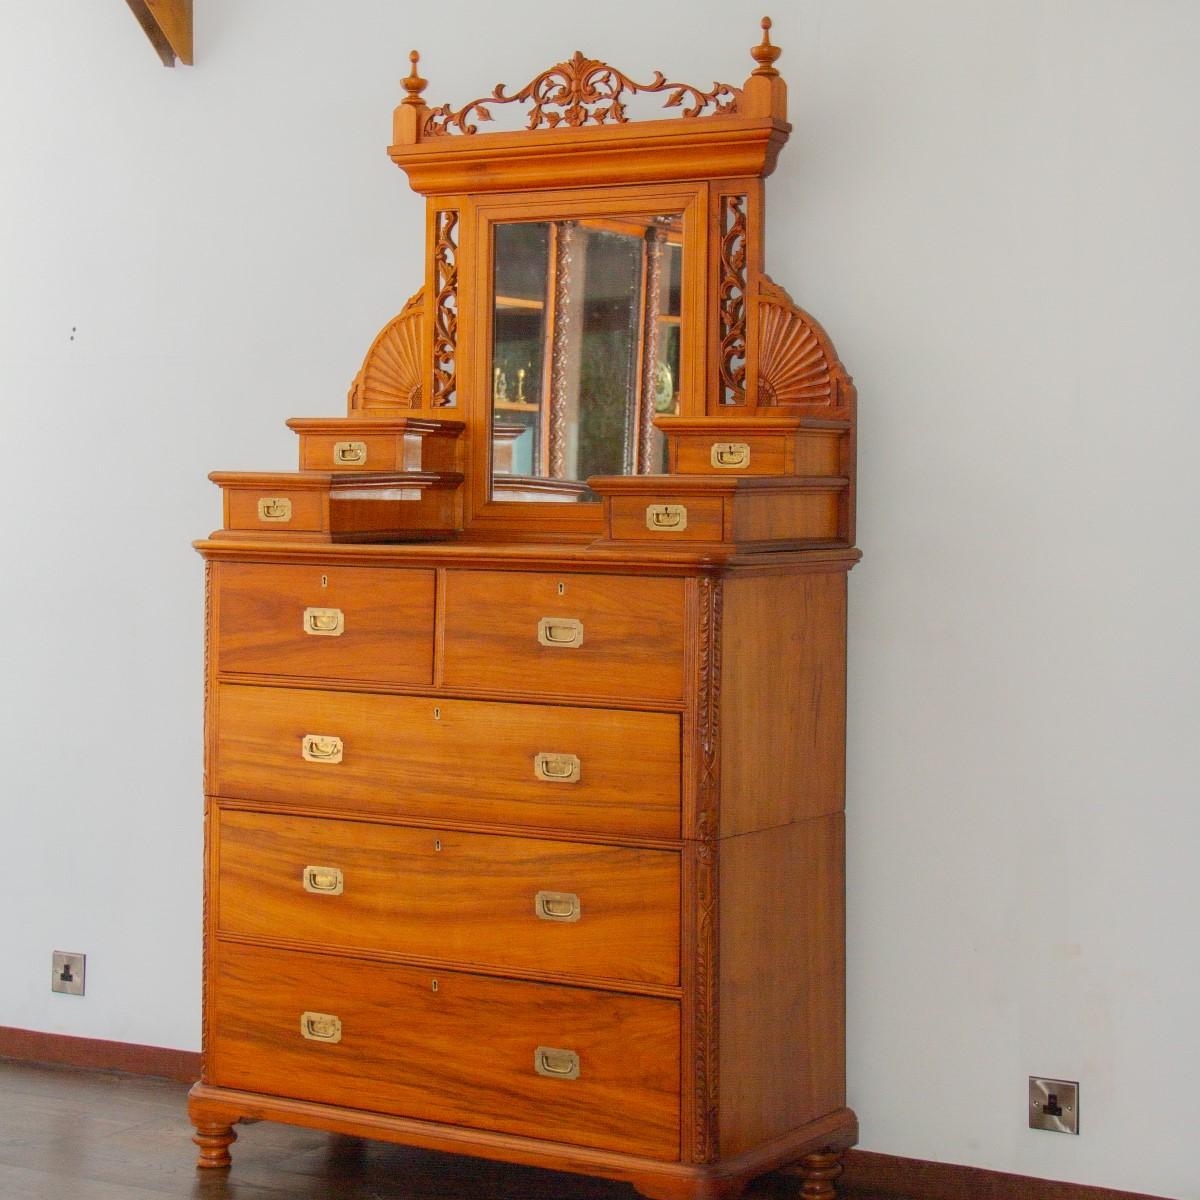 A camphor wood campaign dressing chest with five deep drawers furnished with brass recessed handles. Atop the chest are four small stepped drawer and a mirror with carved fans and foliage fretwork. This campaign chest is fairly unusual as they